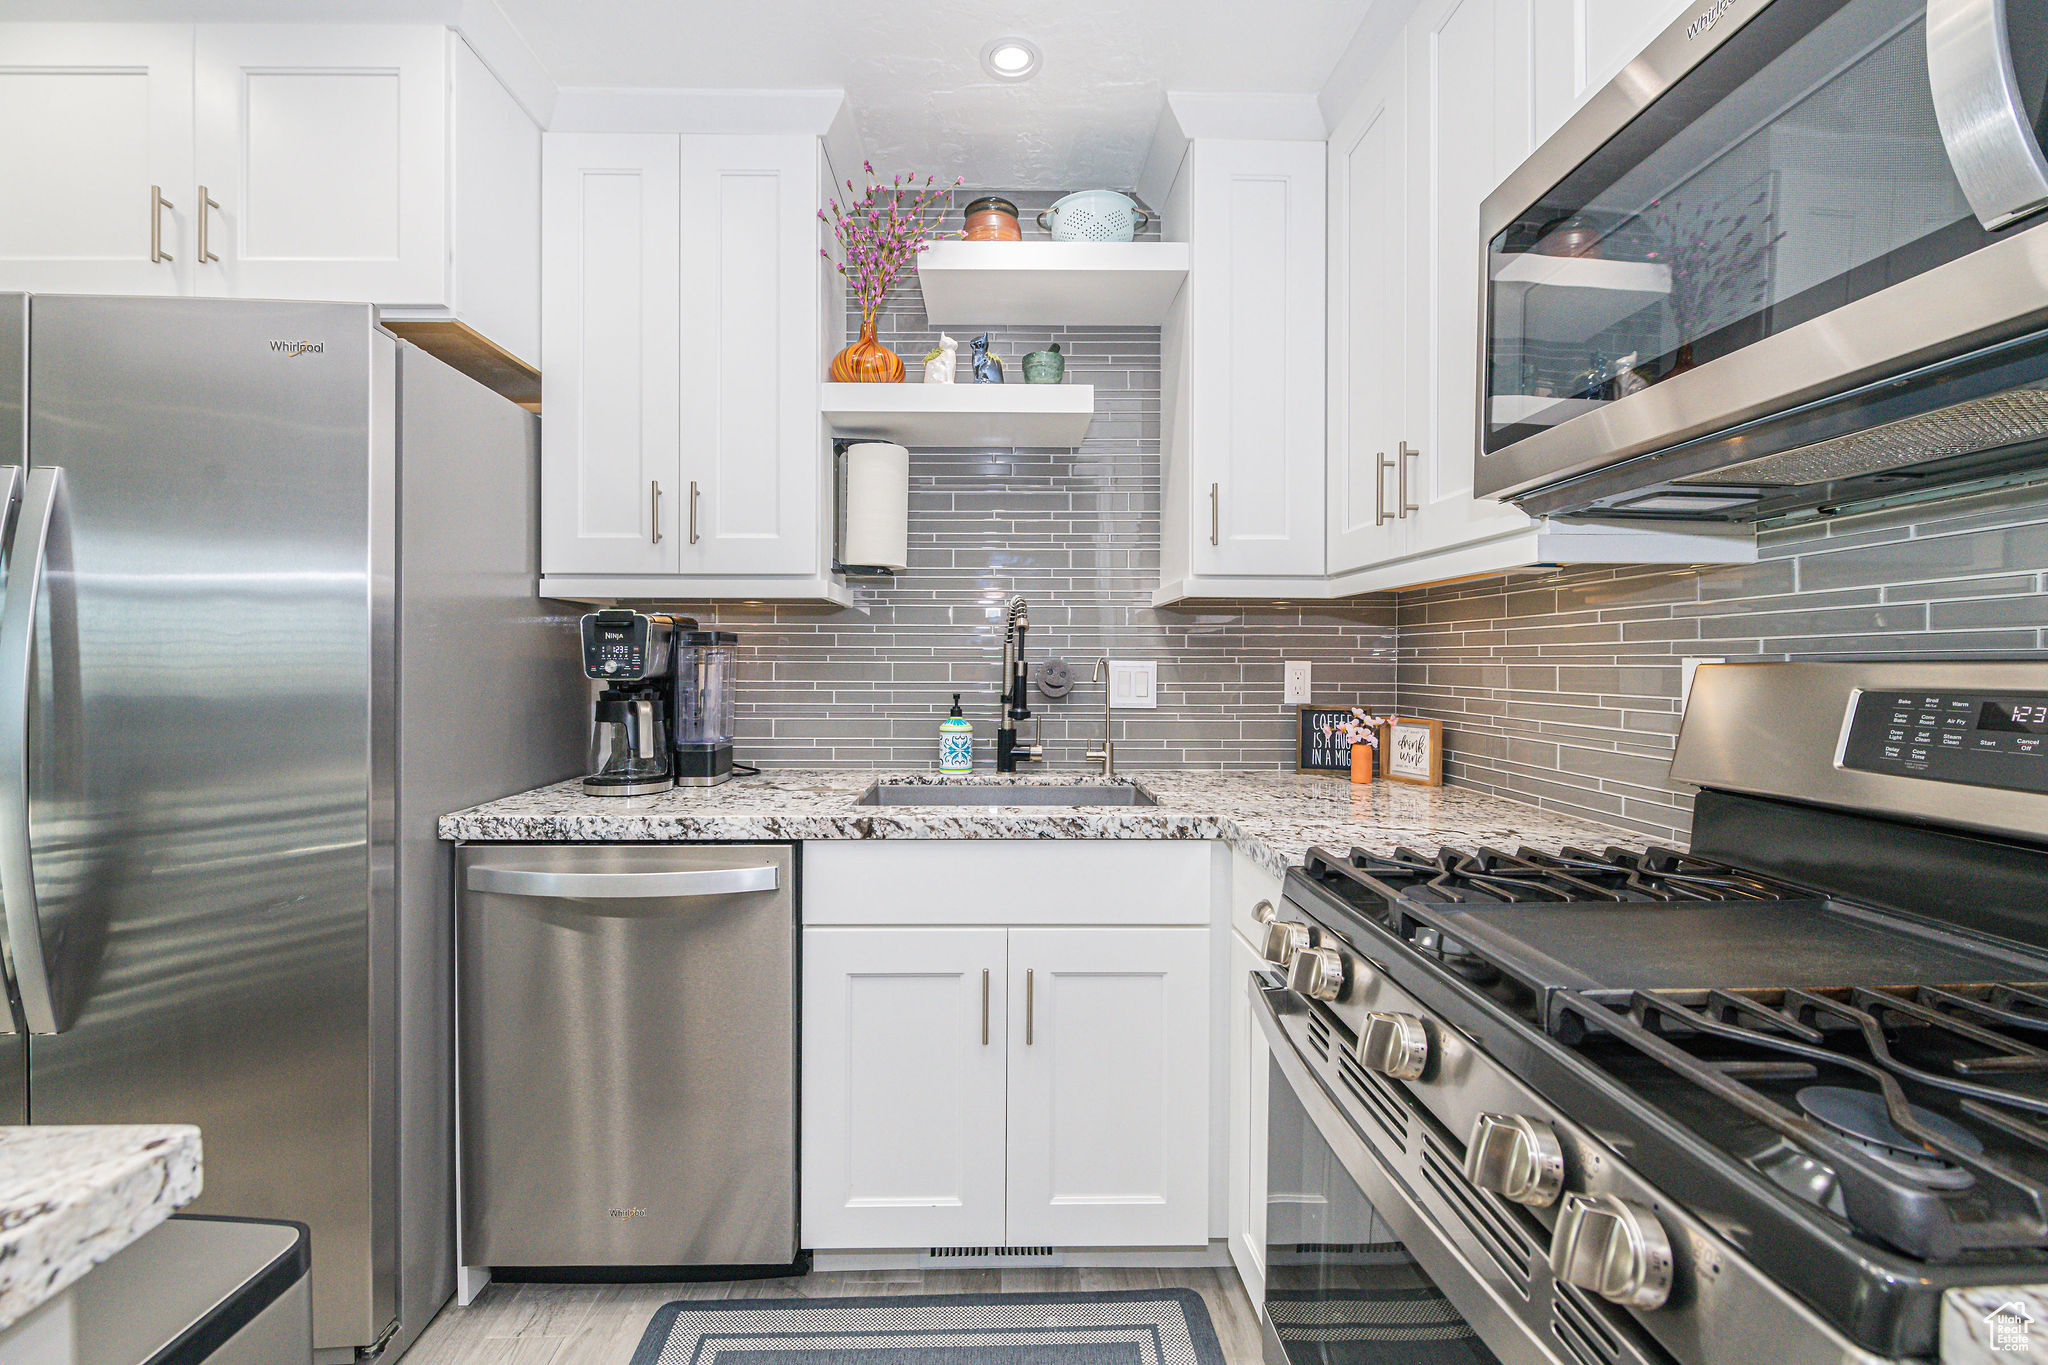 Kitchen featuring white cabinetry, appliances with stainless steel finishes, sink, light stone counters, and tasteful backsplash